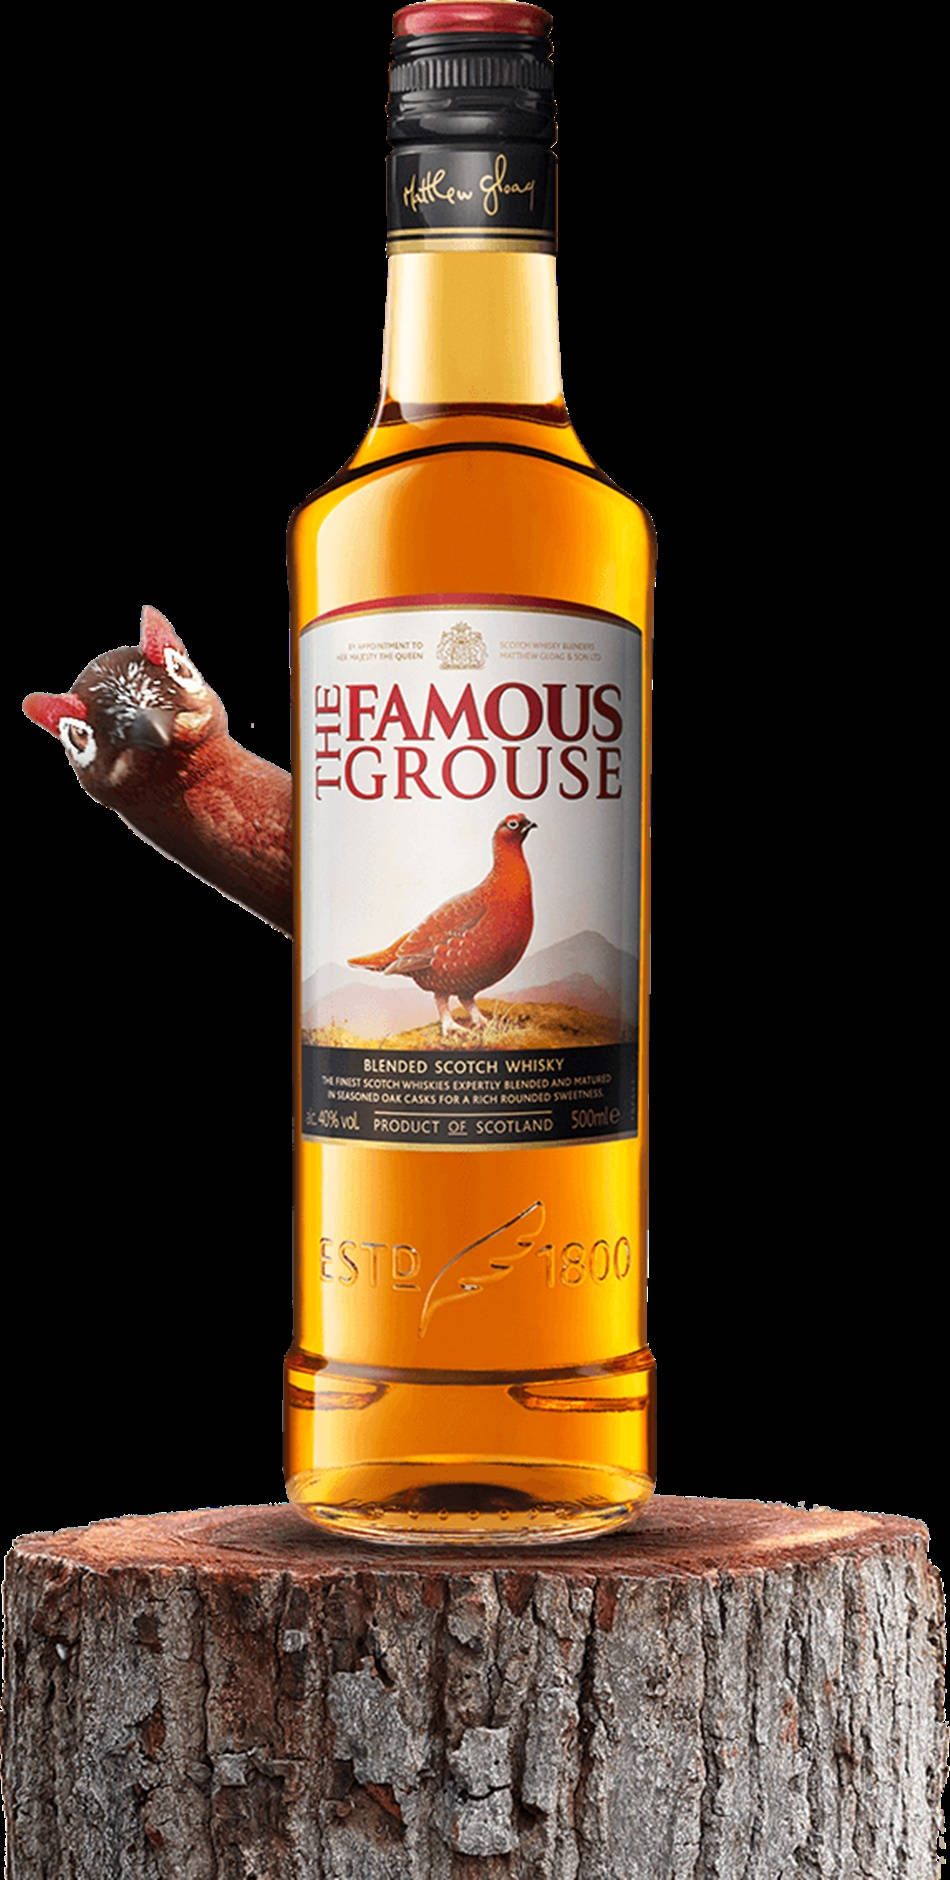 Famous Grouse Peeping Red Grouse Poster Wallpaper